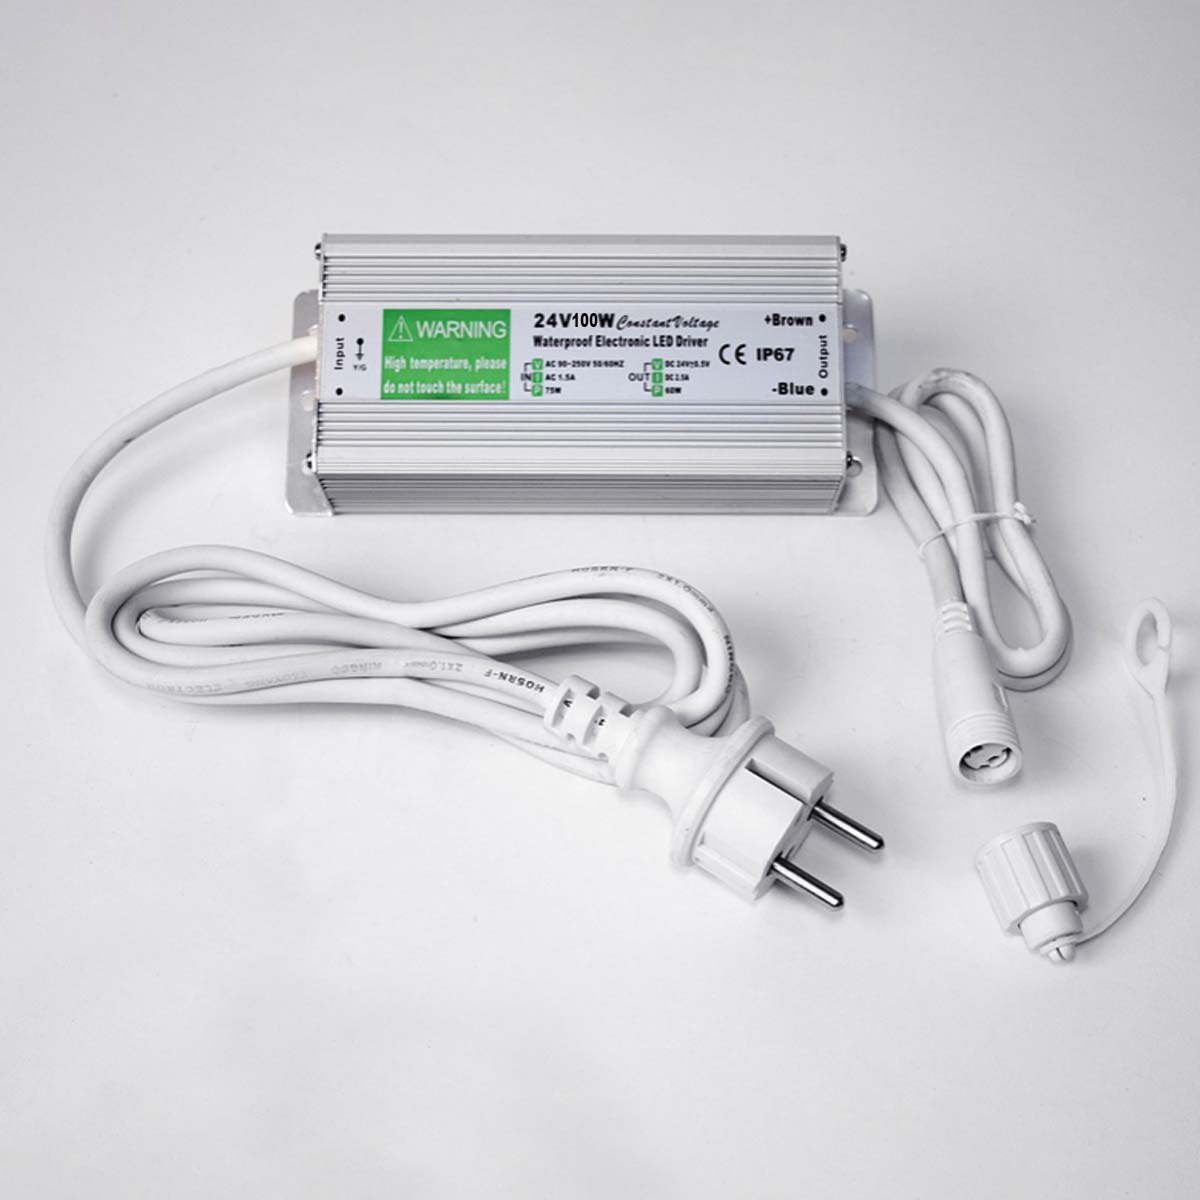 100W low-v connect driver 24v white cable